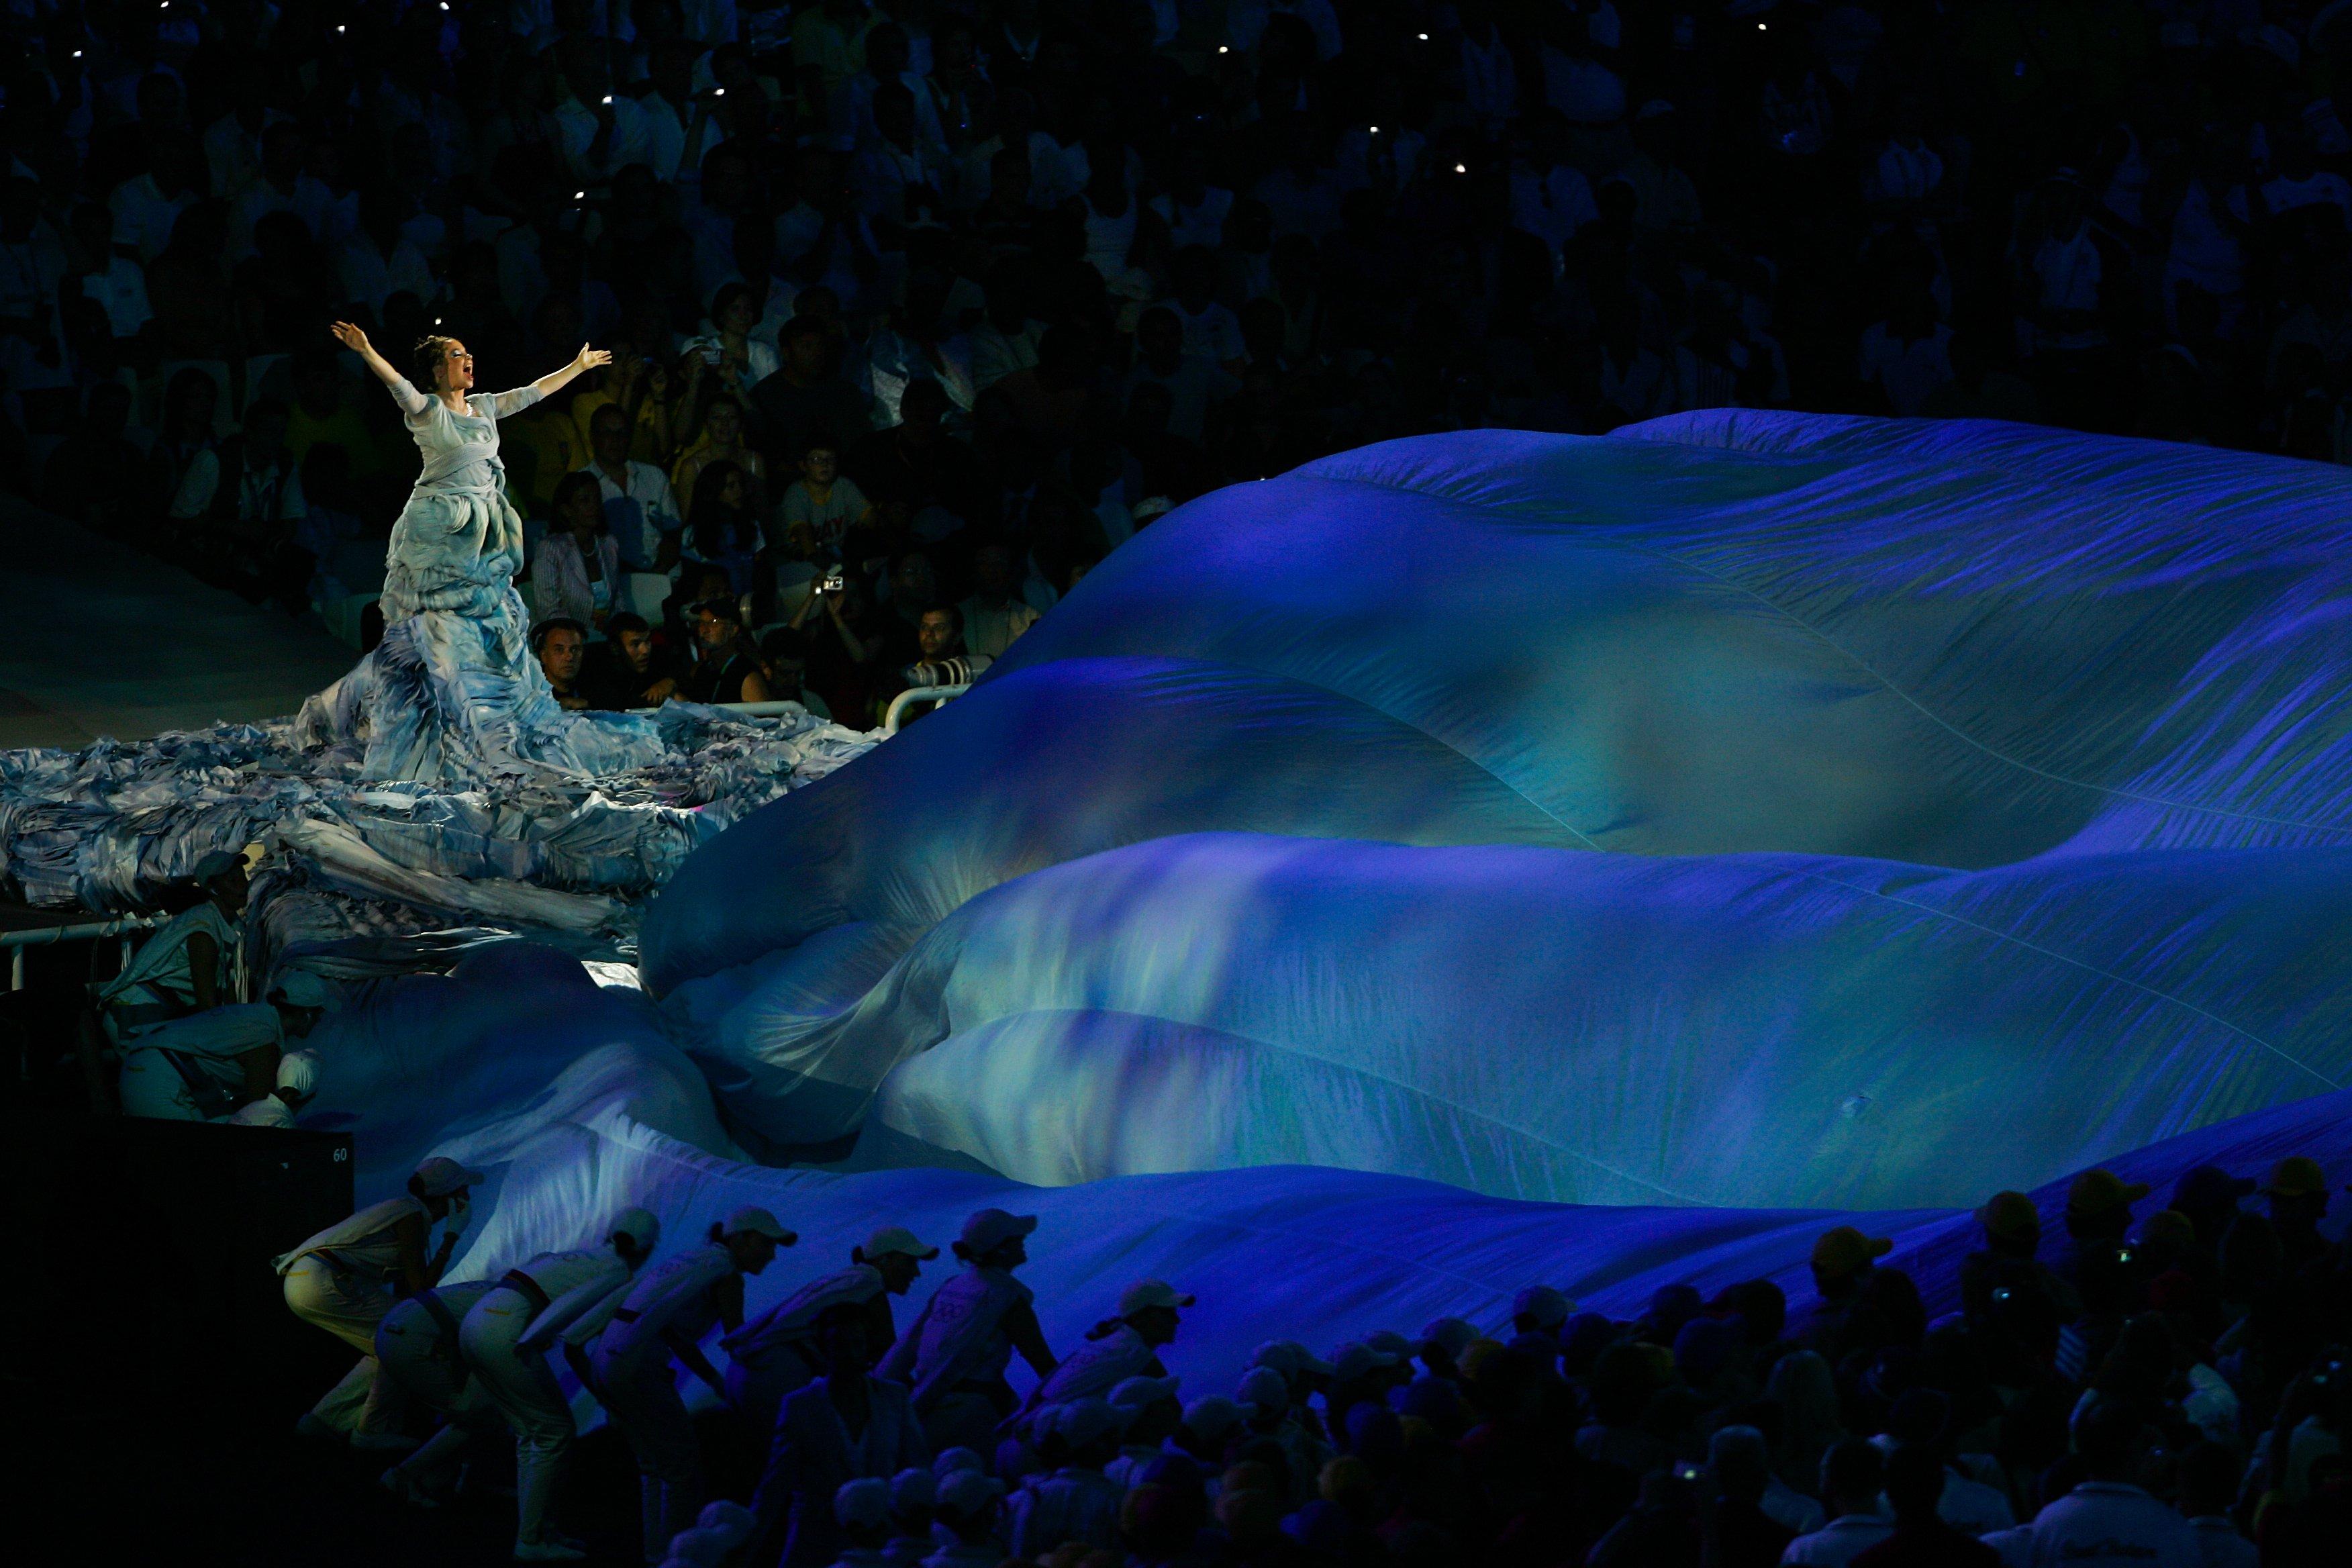 Bjork performs at the Opening ceremony of XXVII Olympiad known as the Athens 2004